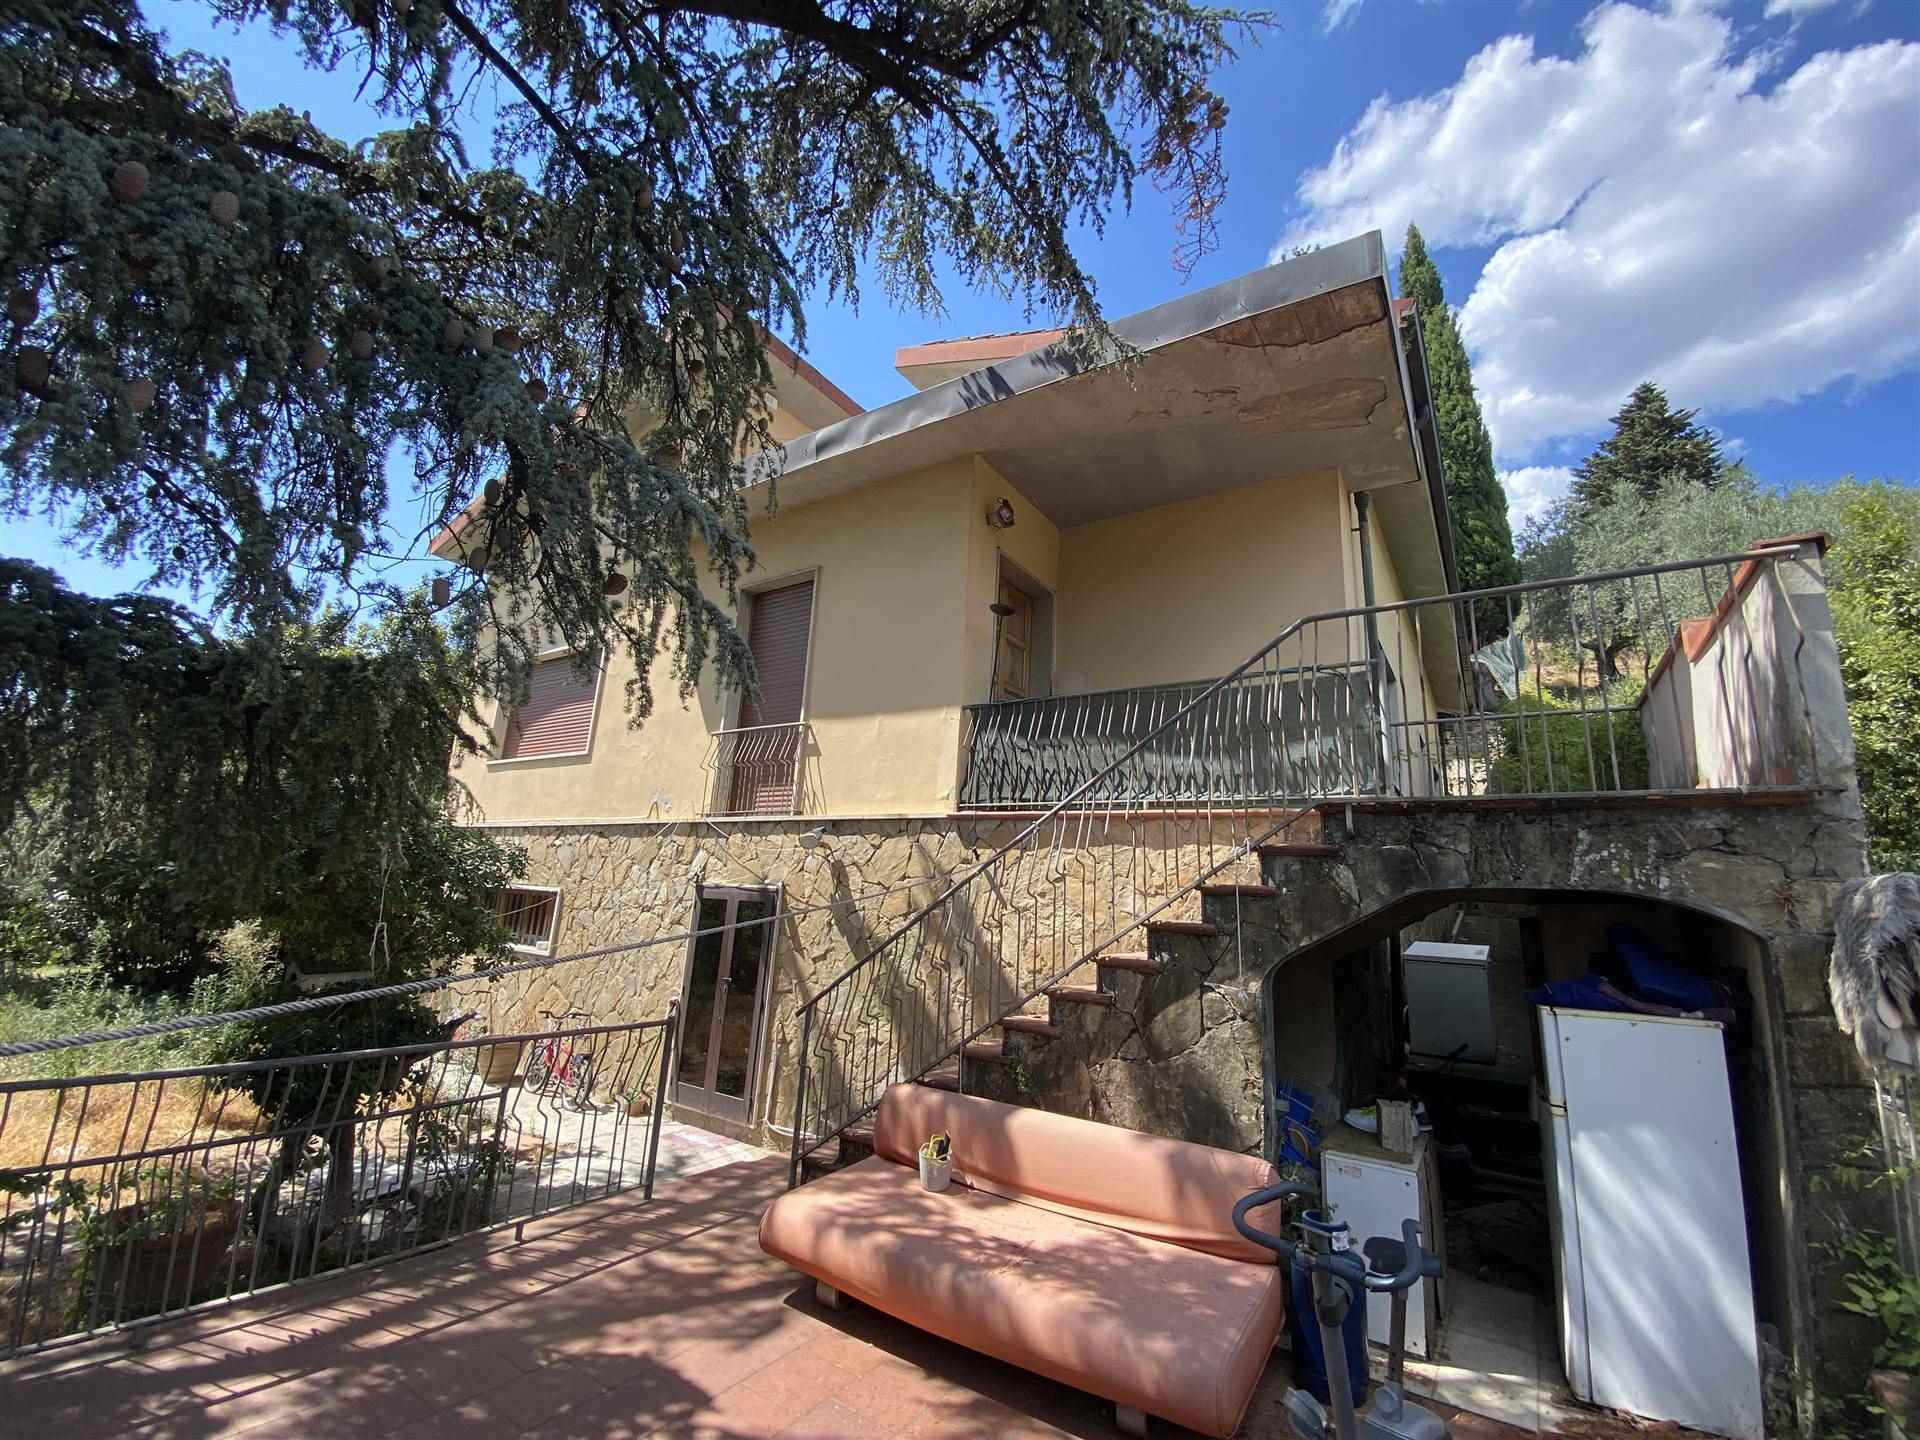 VILLA FIORITA, PRATO, Apartment for sale of 238 Sq. mt., Be restored, Heating Non-existent, Energetic class: G, Epi: 175 kwh/m2 year, composed by: 9.